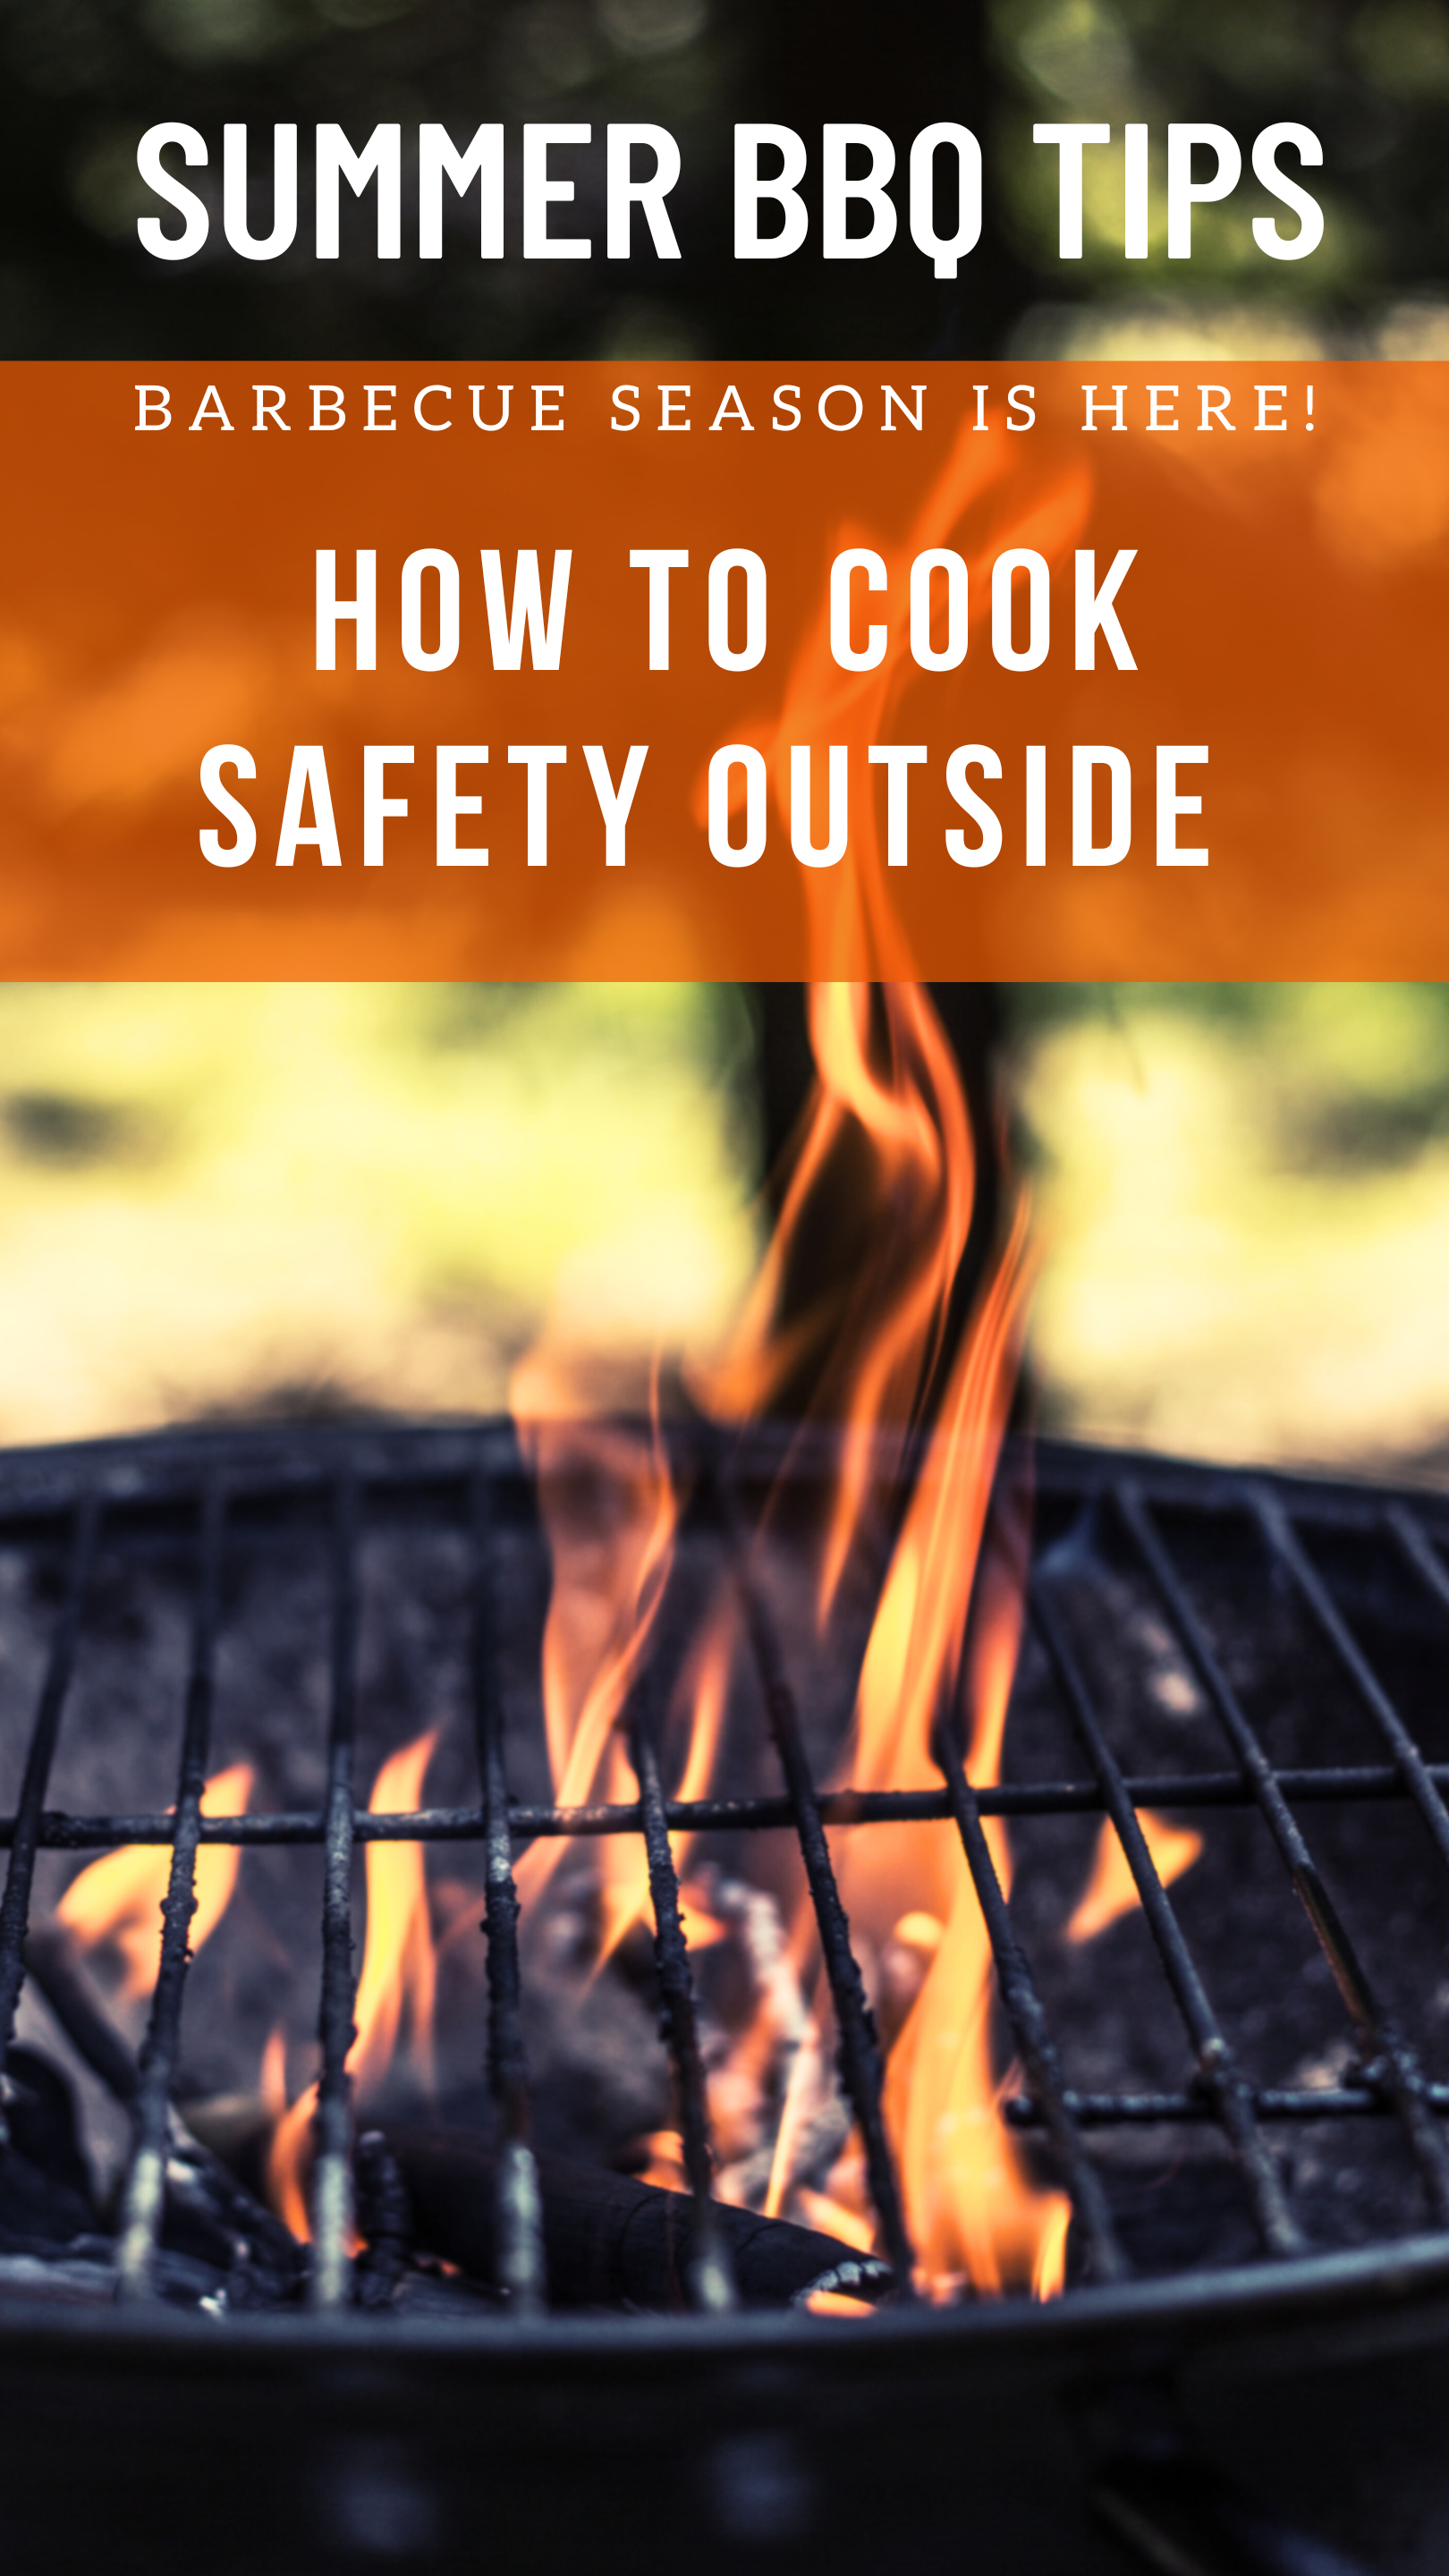 How to cook safety outside - Summer BBQ tips